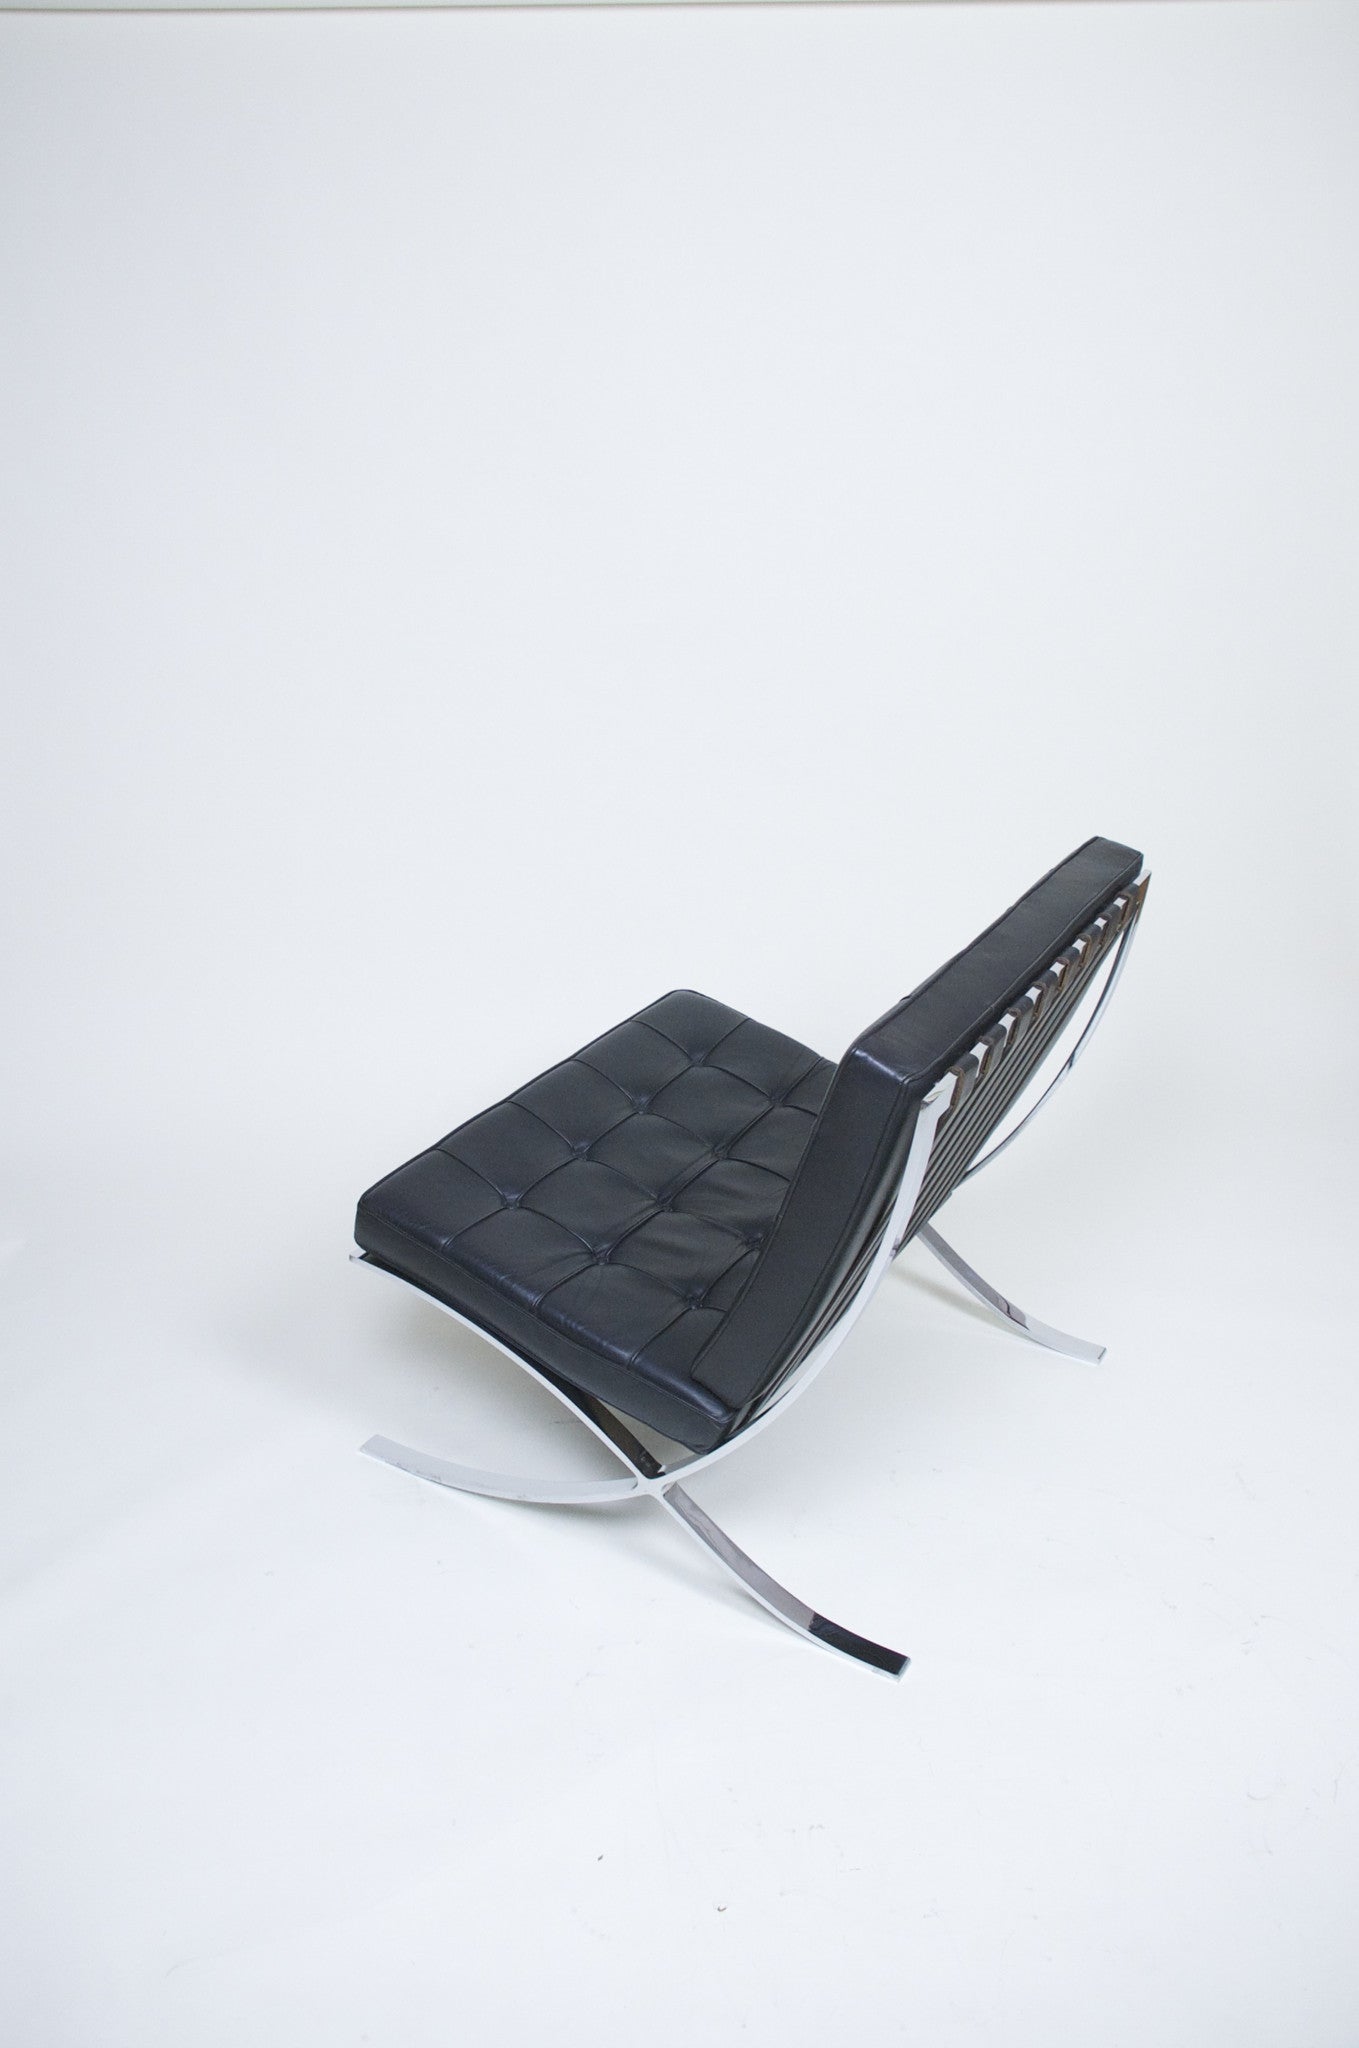 SOLD Knoll Barcelona Chair Mies Van Der Rohe Black Leather Gorgeous Condition #1 of 2